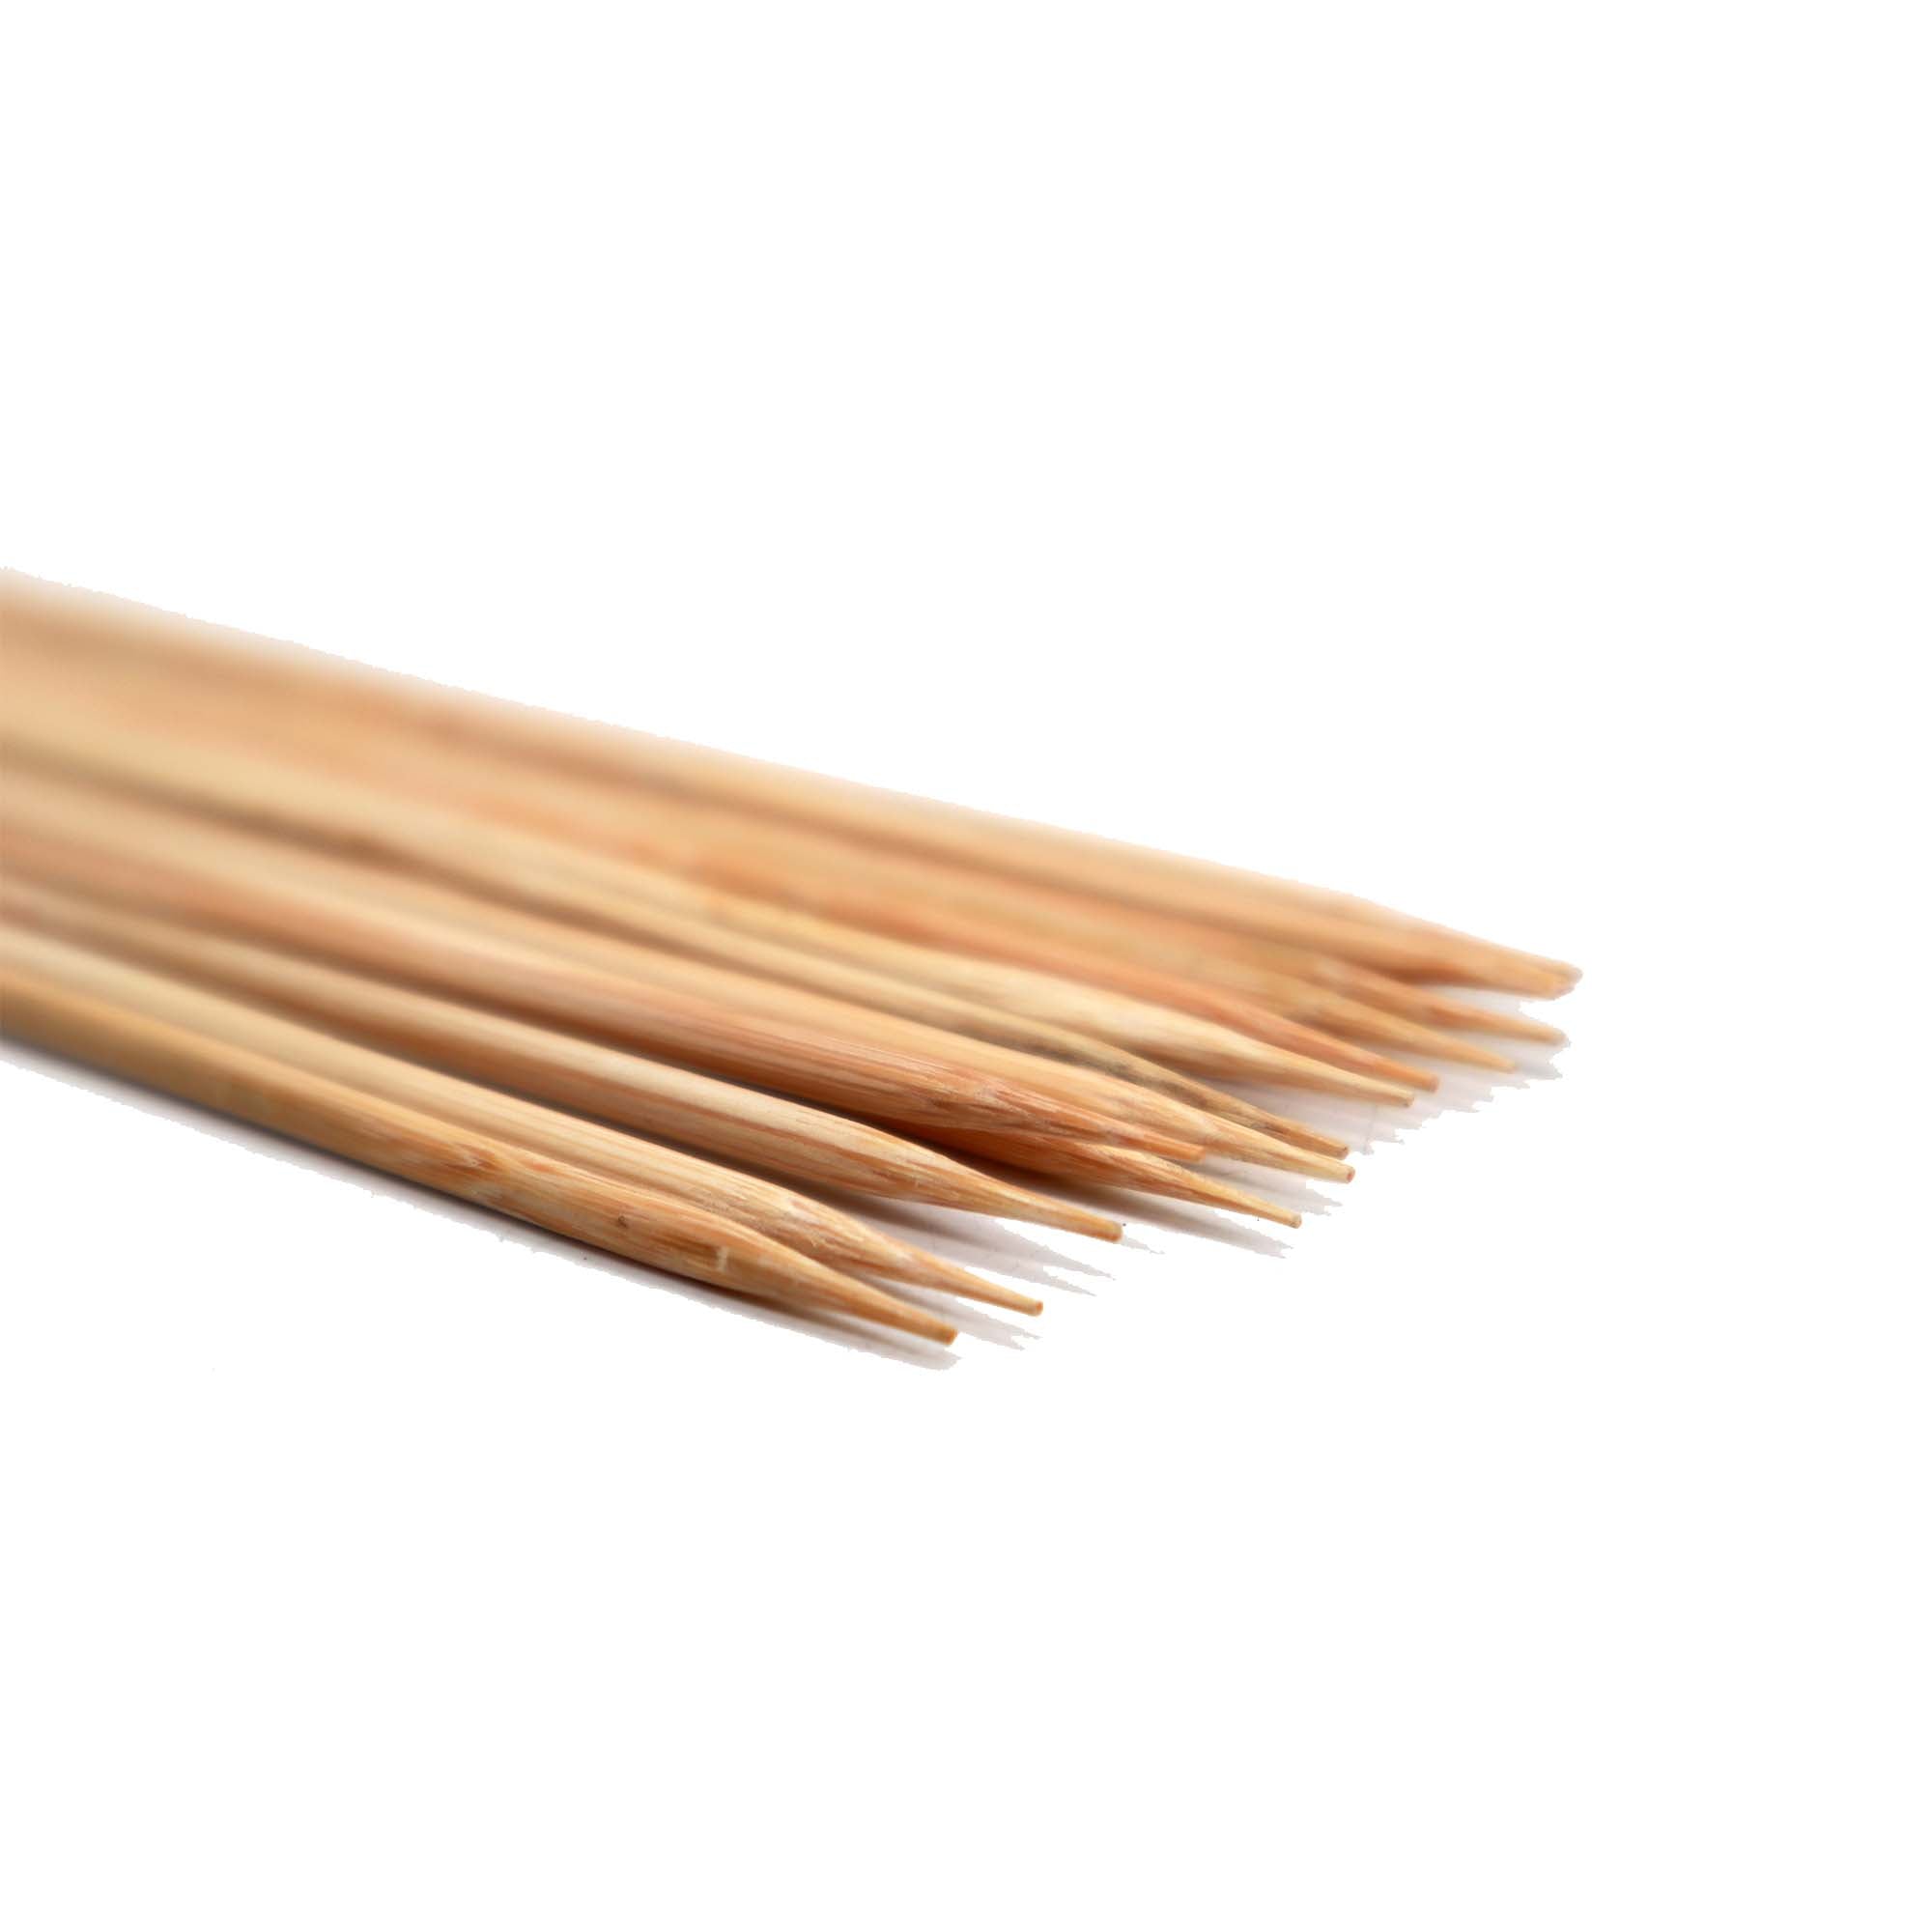 Bamboo Skewers 25cmx3mm 100pc discontinued